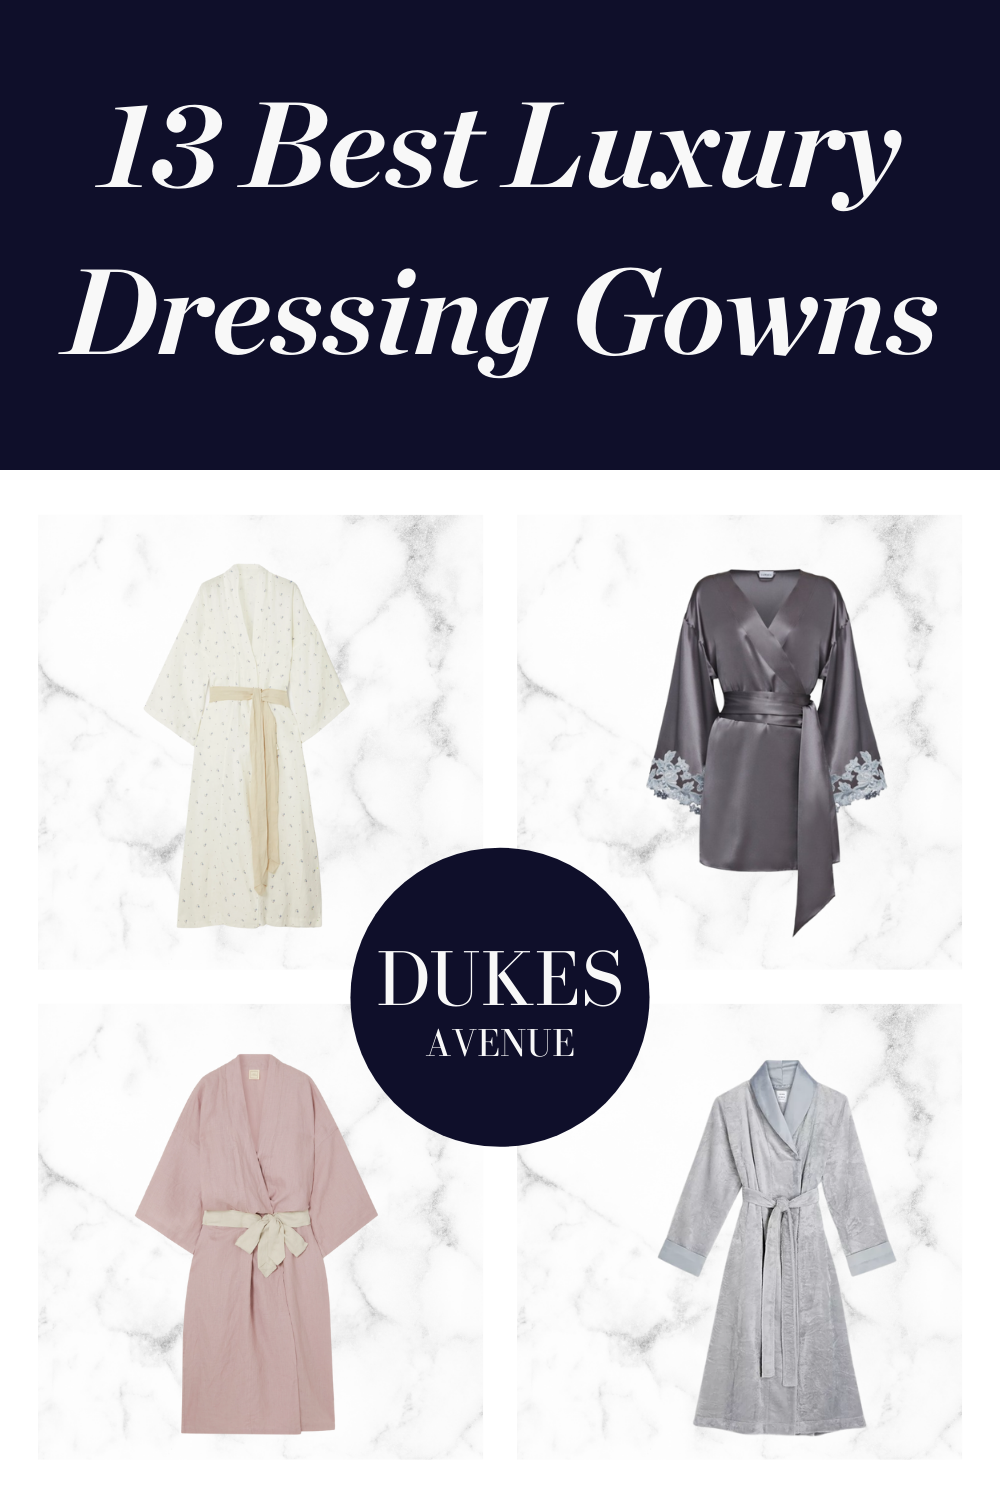 4 luxury dressing gowns against a marble background with text overlay '13 best luxury dressing gowns'